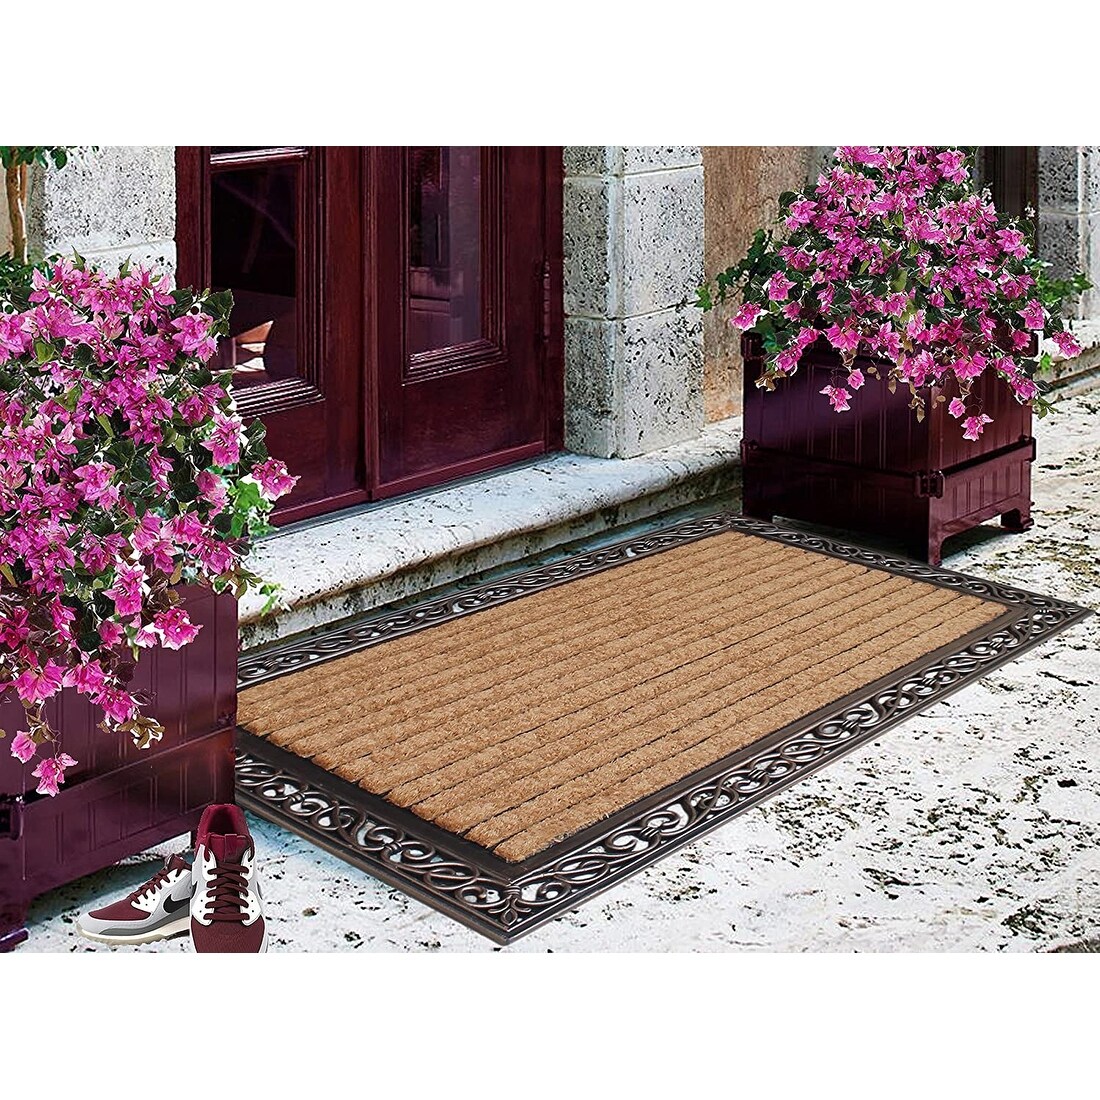 https://ak1.ostkcdn.com/images/products/is/images/direct/3da2bf5172f78f60d27b46561deca5a4d0bab479/Molded-Large-Double-Door-Rubber-and-Coir-Door-Mat-%2830%22-X-48%22%29.jpg